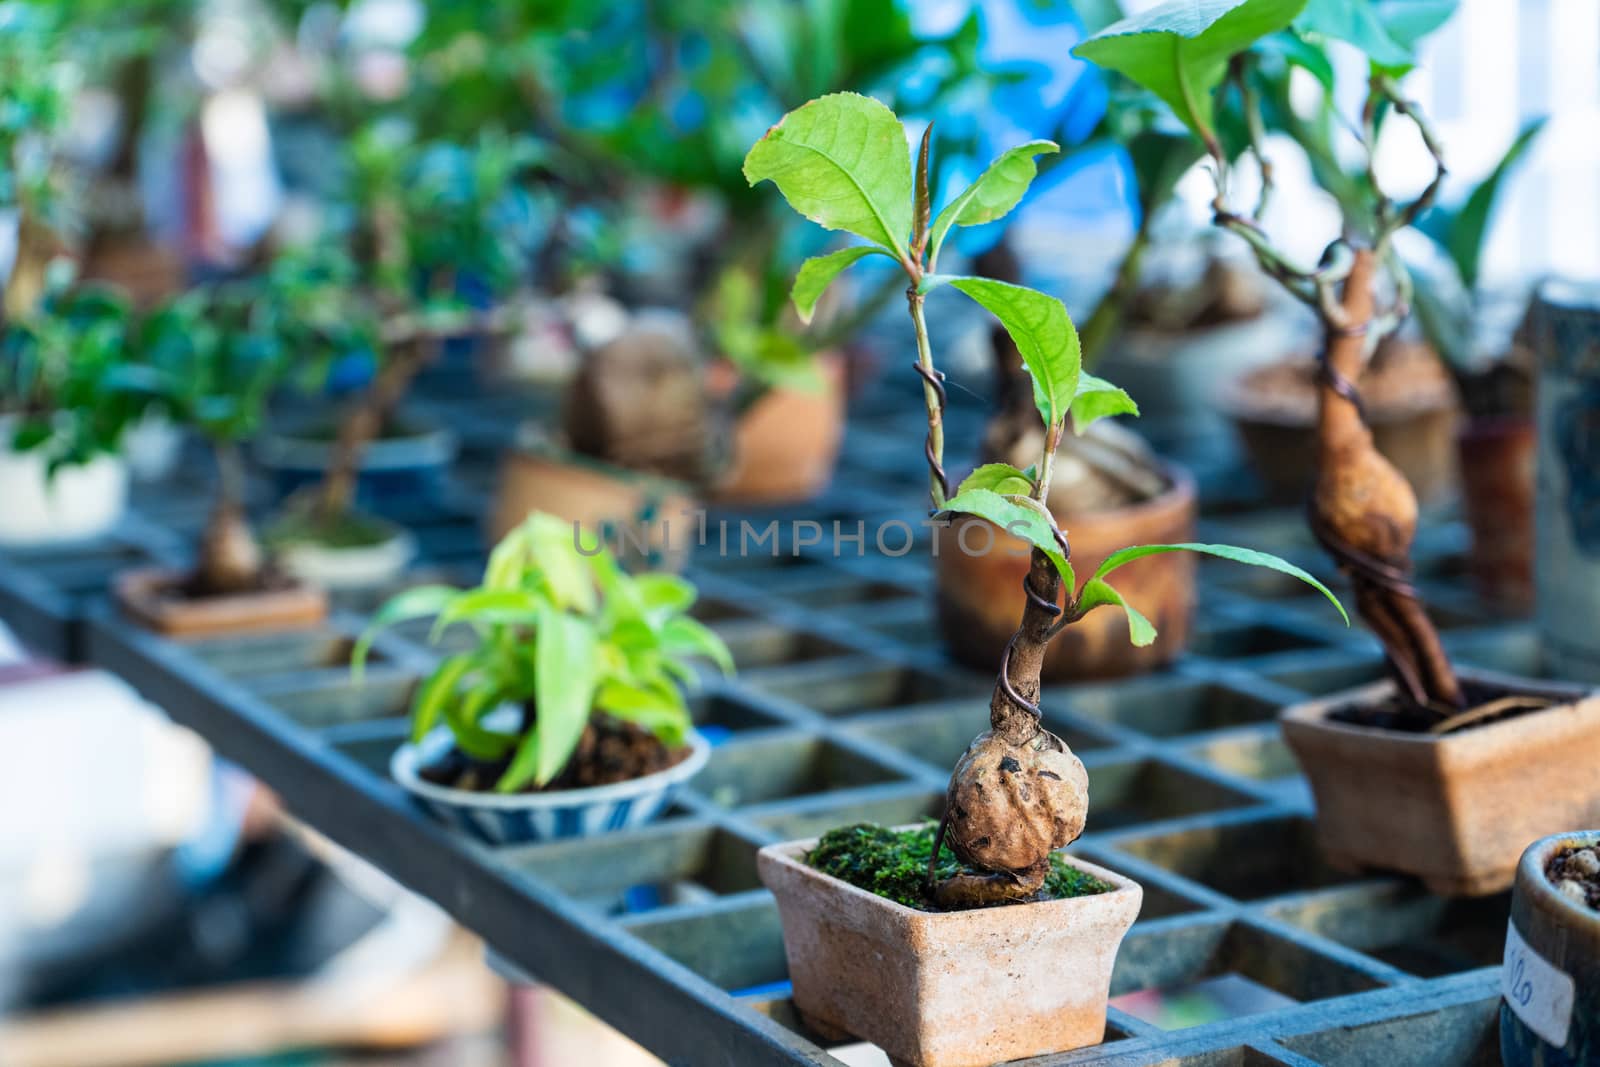 Decorative plants for decorating a room in a street market in Asia.